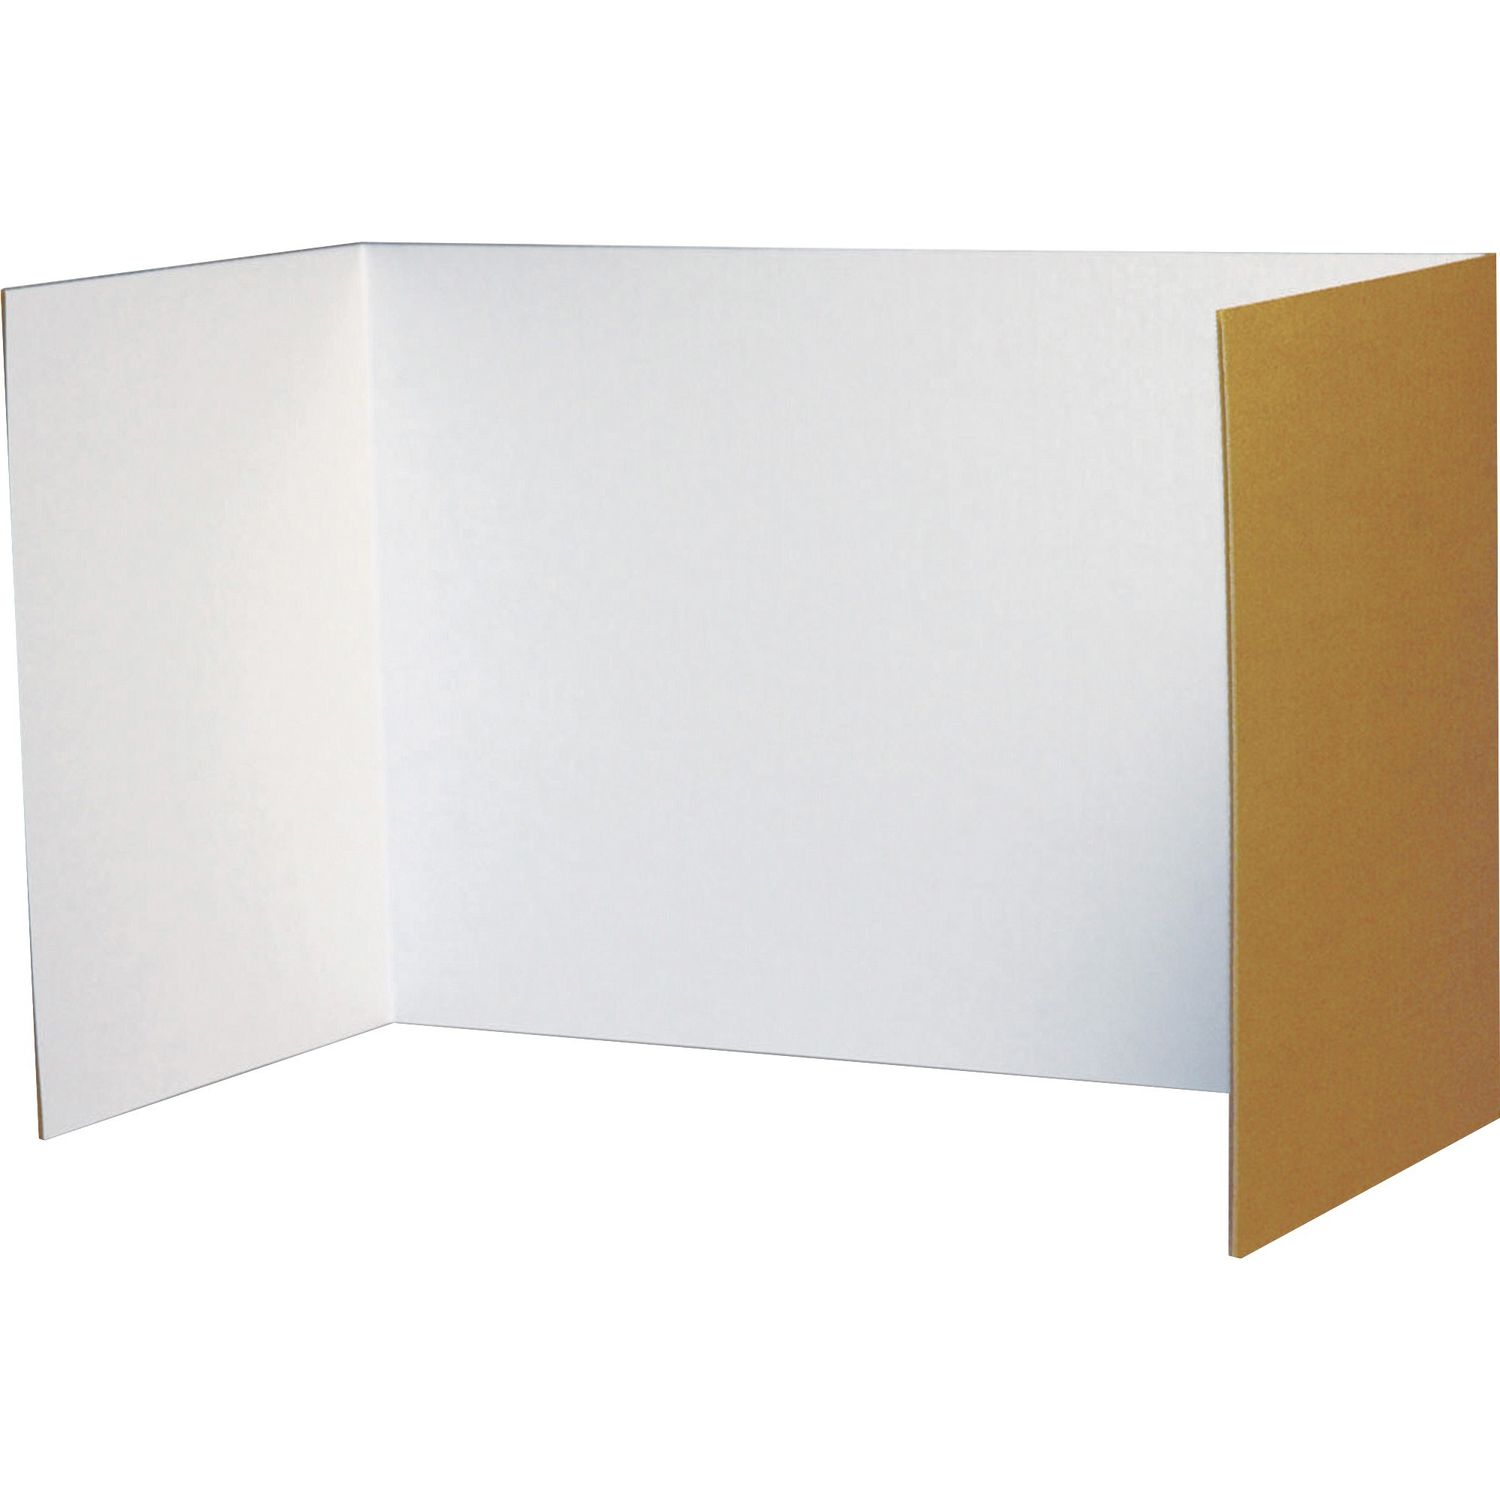 Privacy Boards 48"W x 16"H, 4 Boards/Pack, White